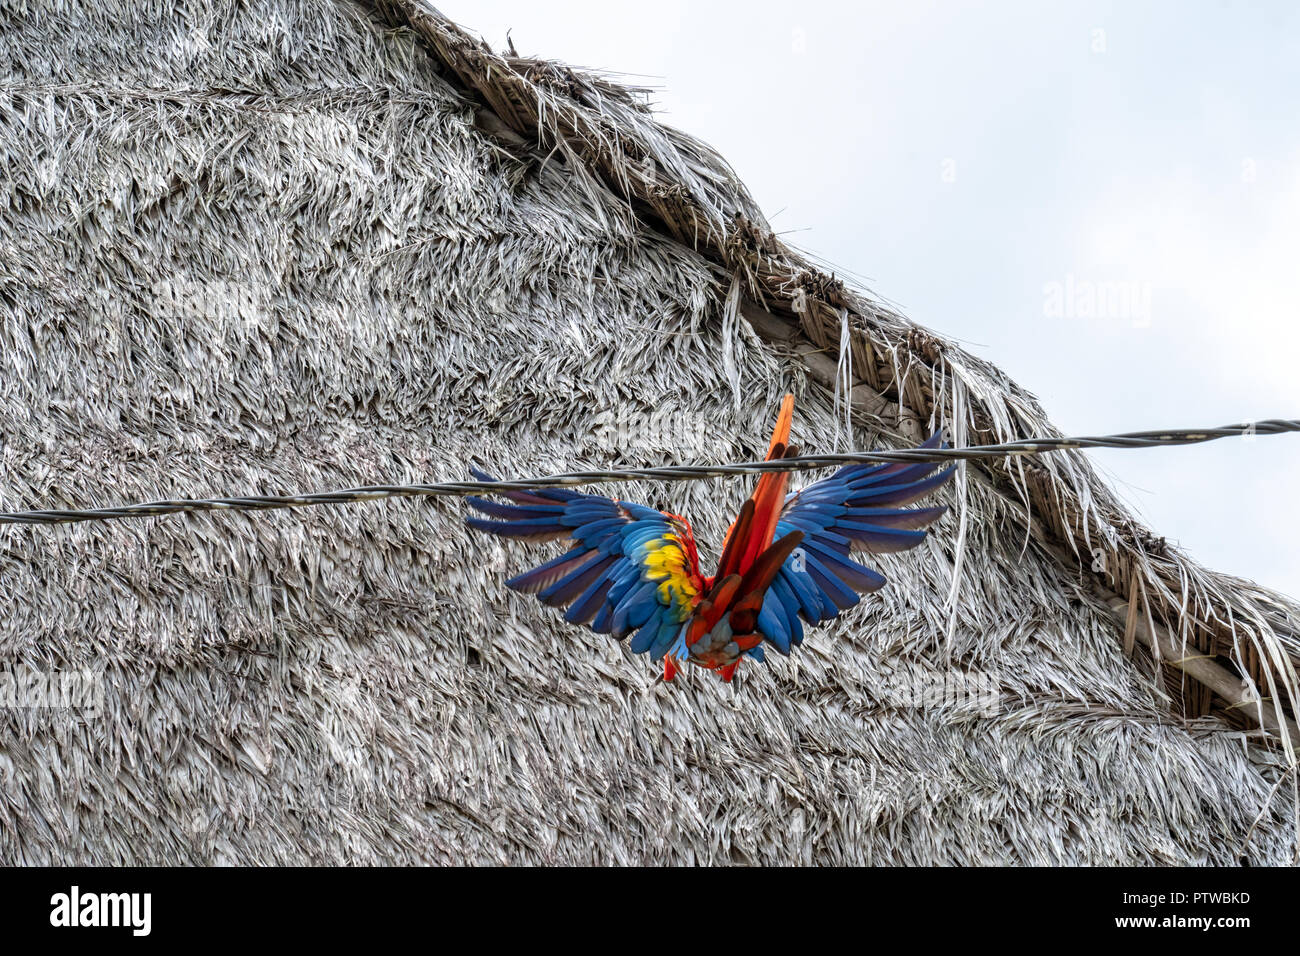 Puerto Miguel Peru, South America.  Scarlet Macaw doing acrobatics on a wire beside some thatched roof homes. Stock Photo